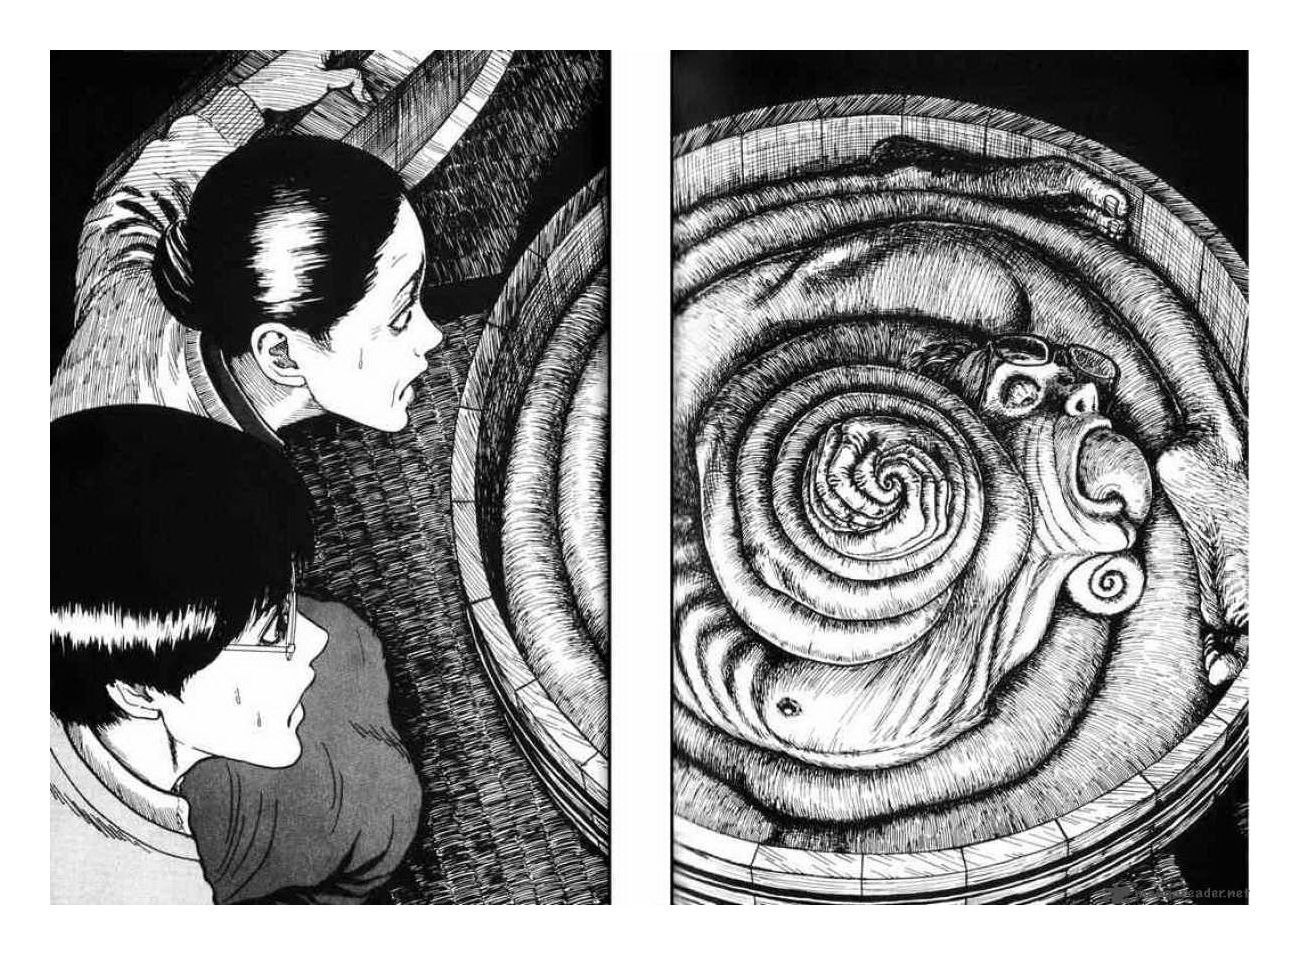 Practicing Junji Ito's art style, here are some of the latest doodles! : r/ junjiito